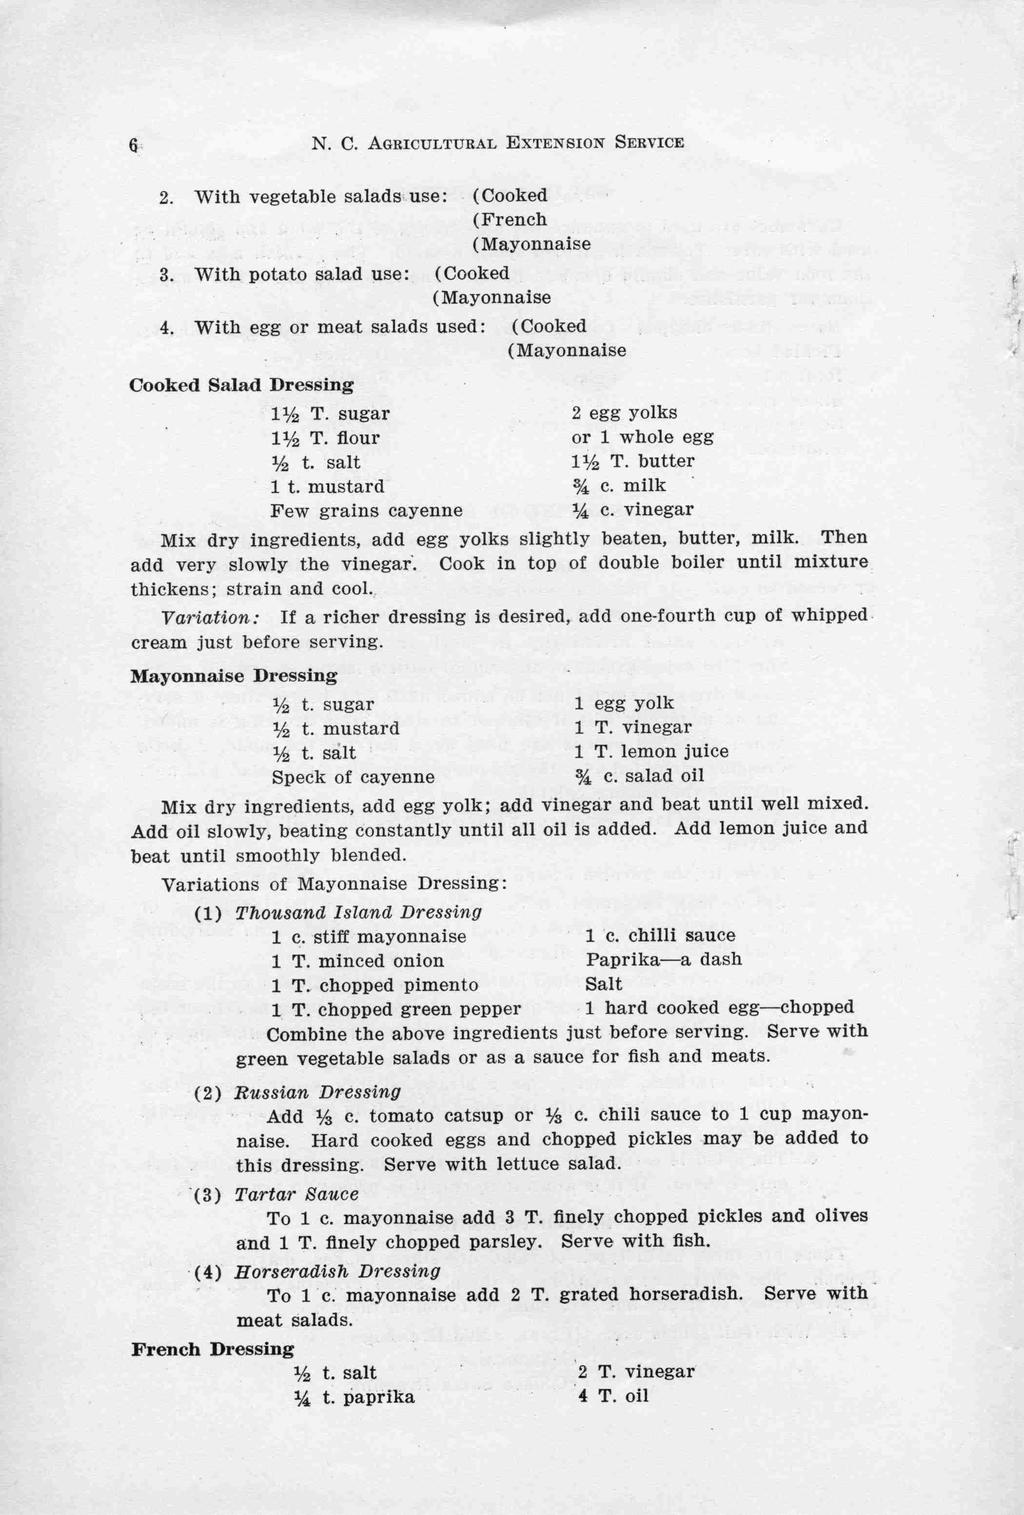 6- N. C. AGRICULTURAL EXTENSION SERVICE. 2. With vegetable salads: use: (Cooked (French, 7 _ (Mayonnaise 3. With potato salad use: (Cooked (Mayonnaise 4.